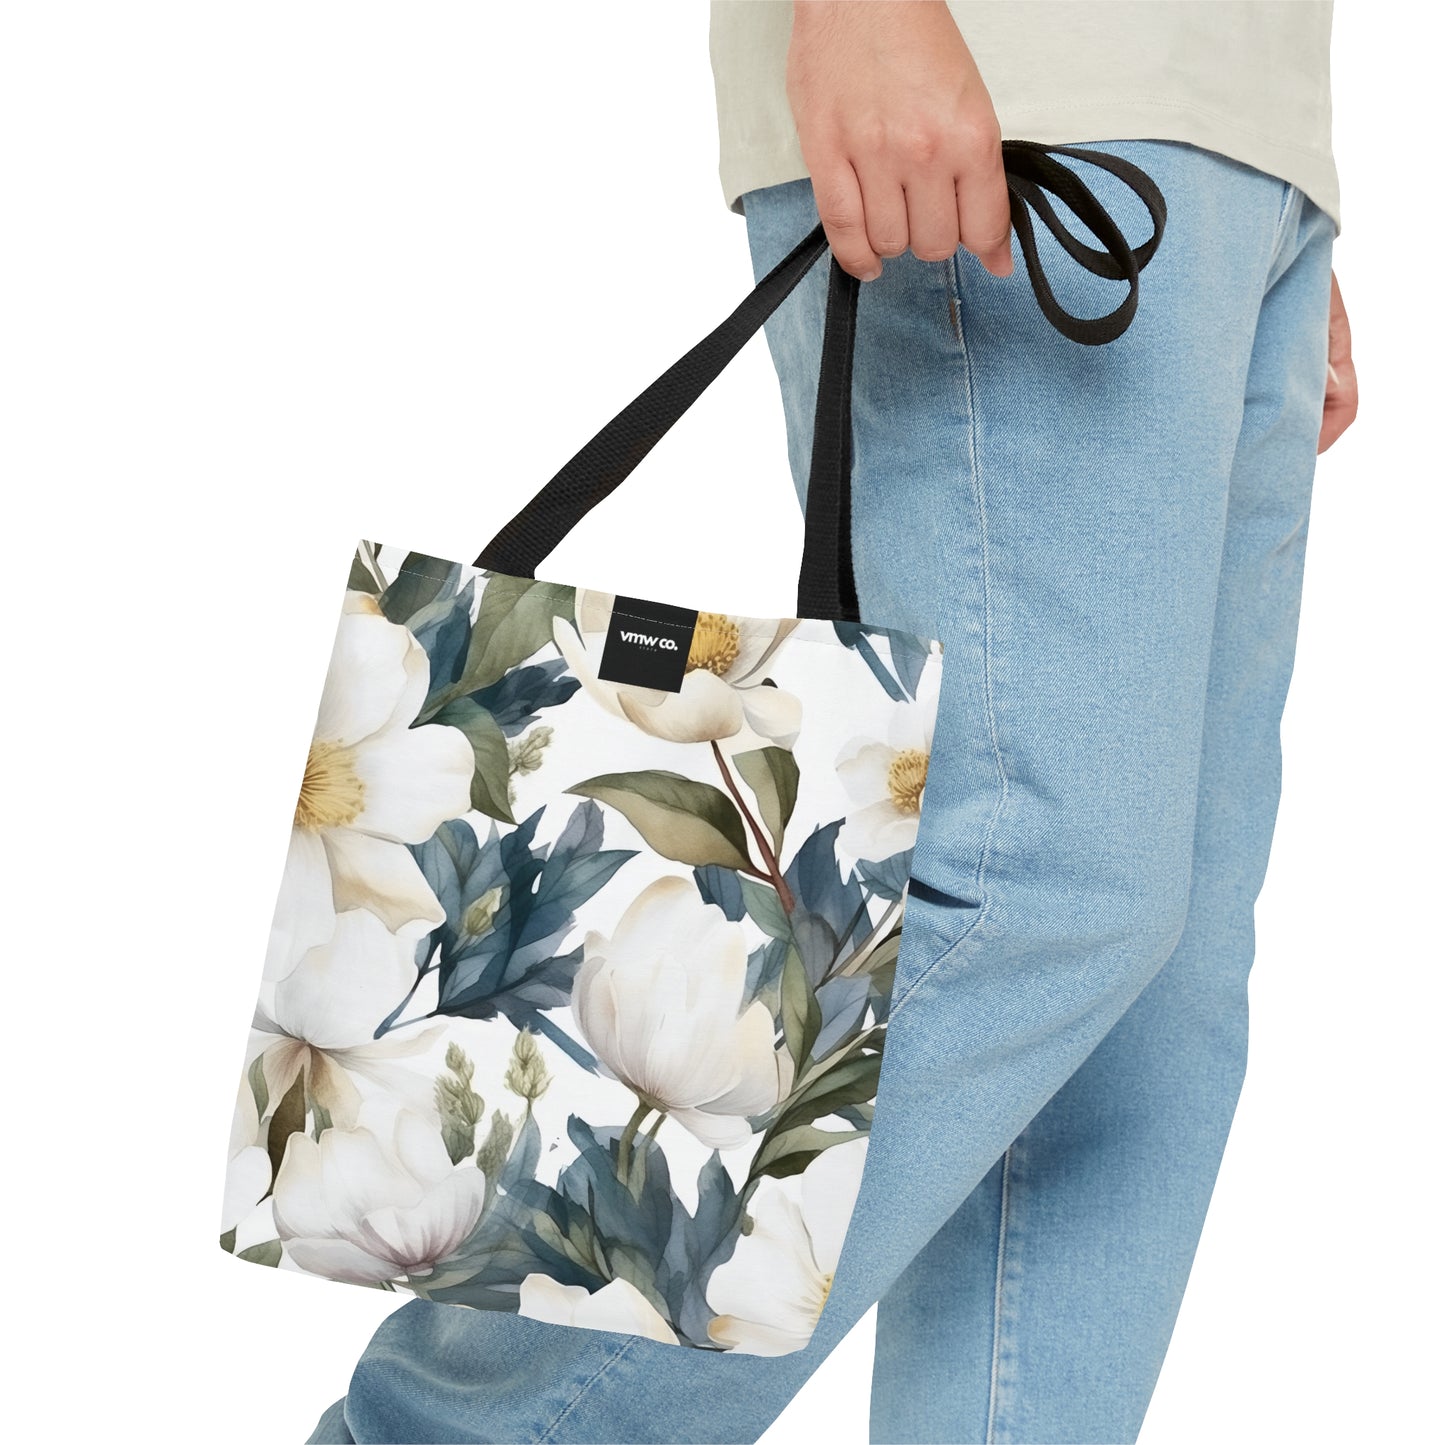 White Blue Floral Tote Bag